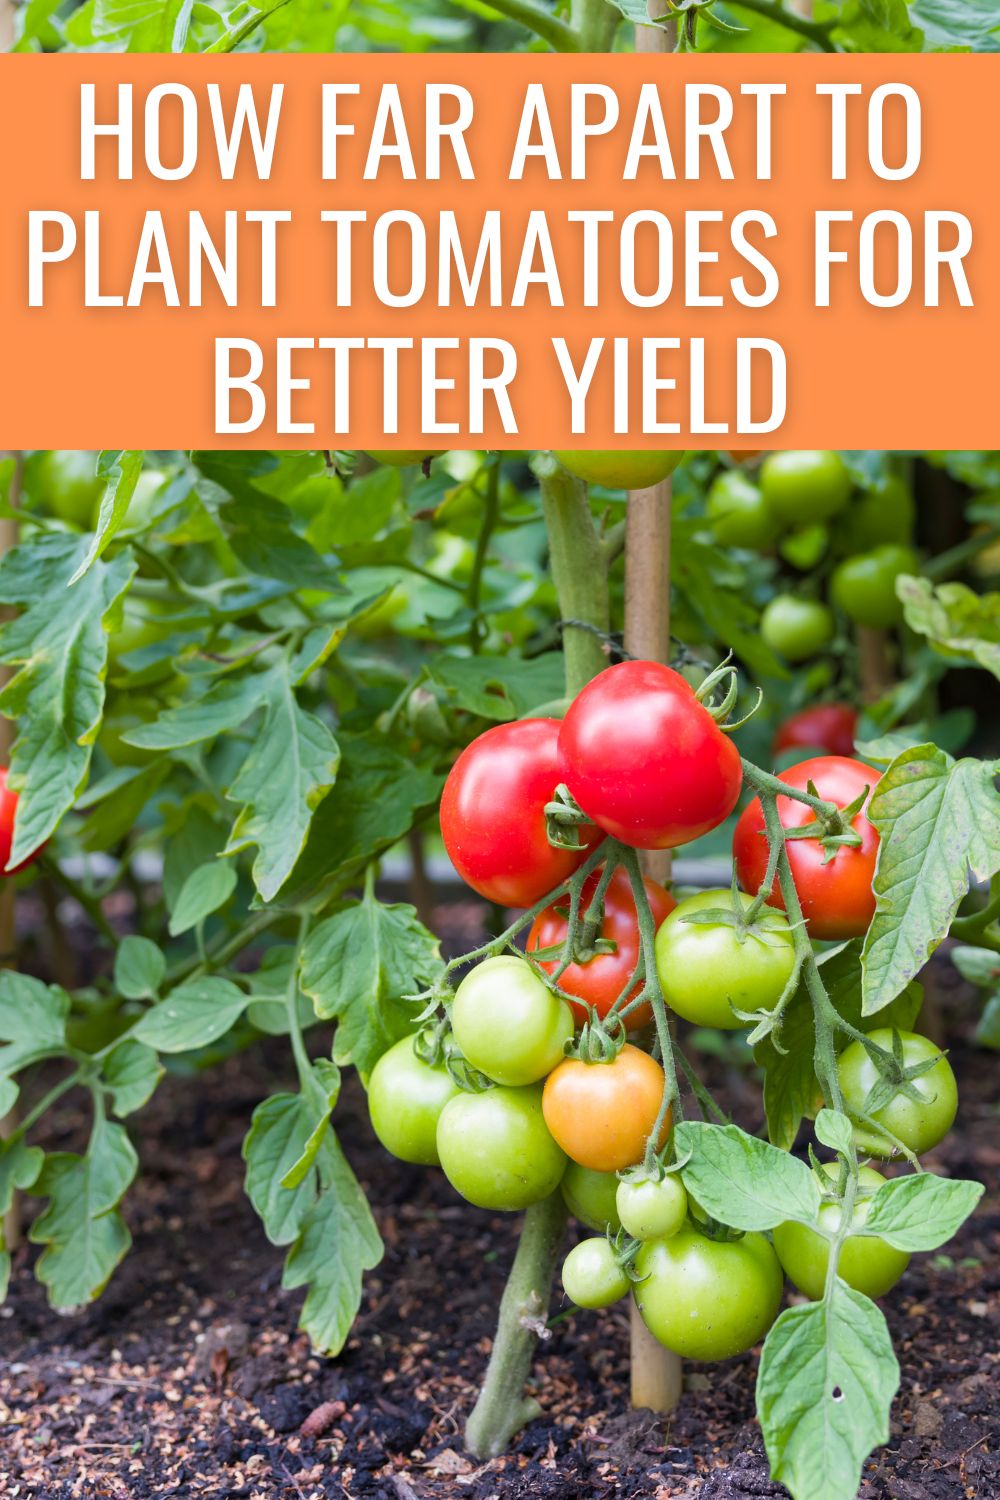 How far apart to plant tomatoes for better yield.